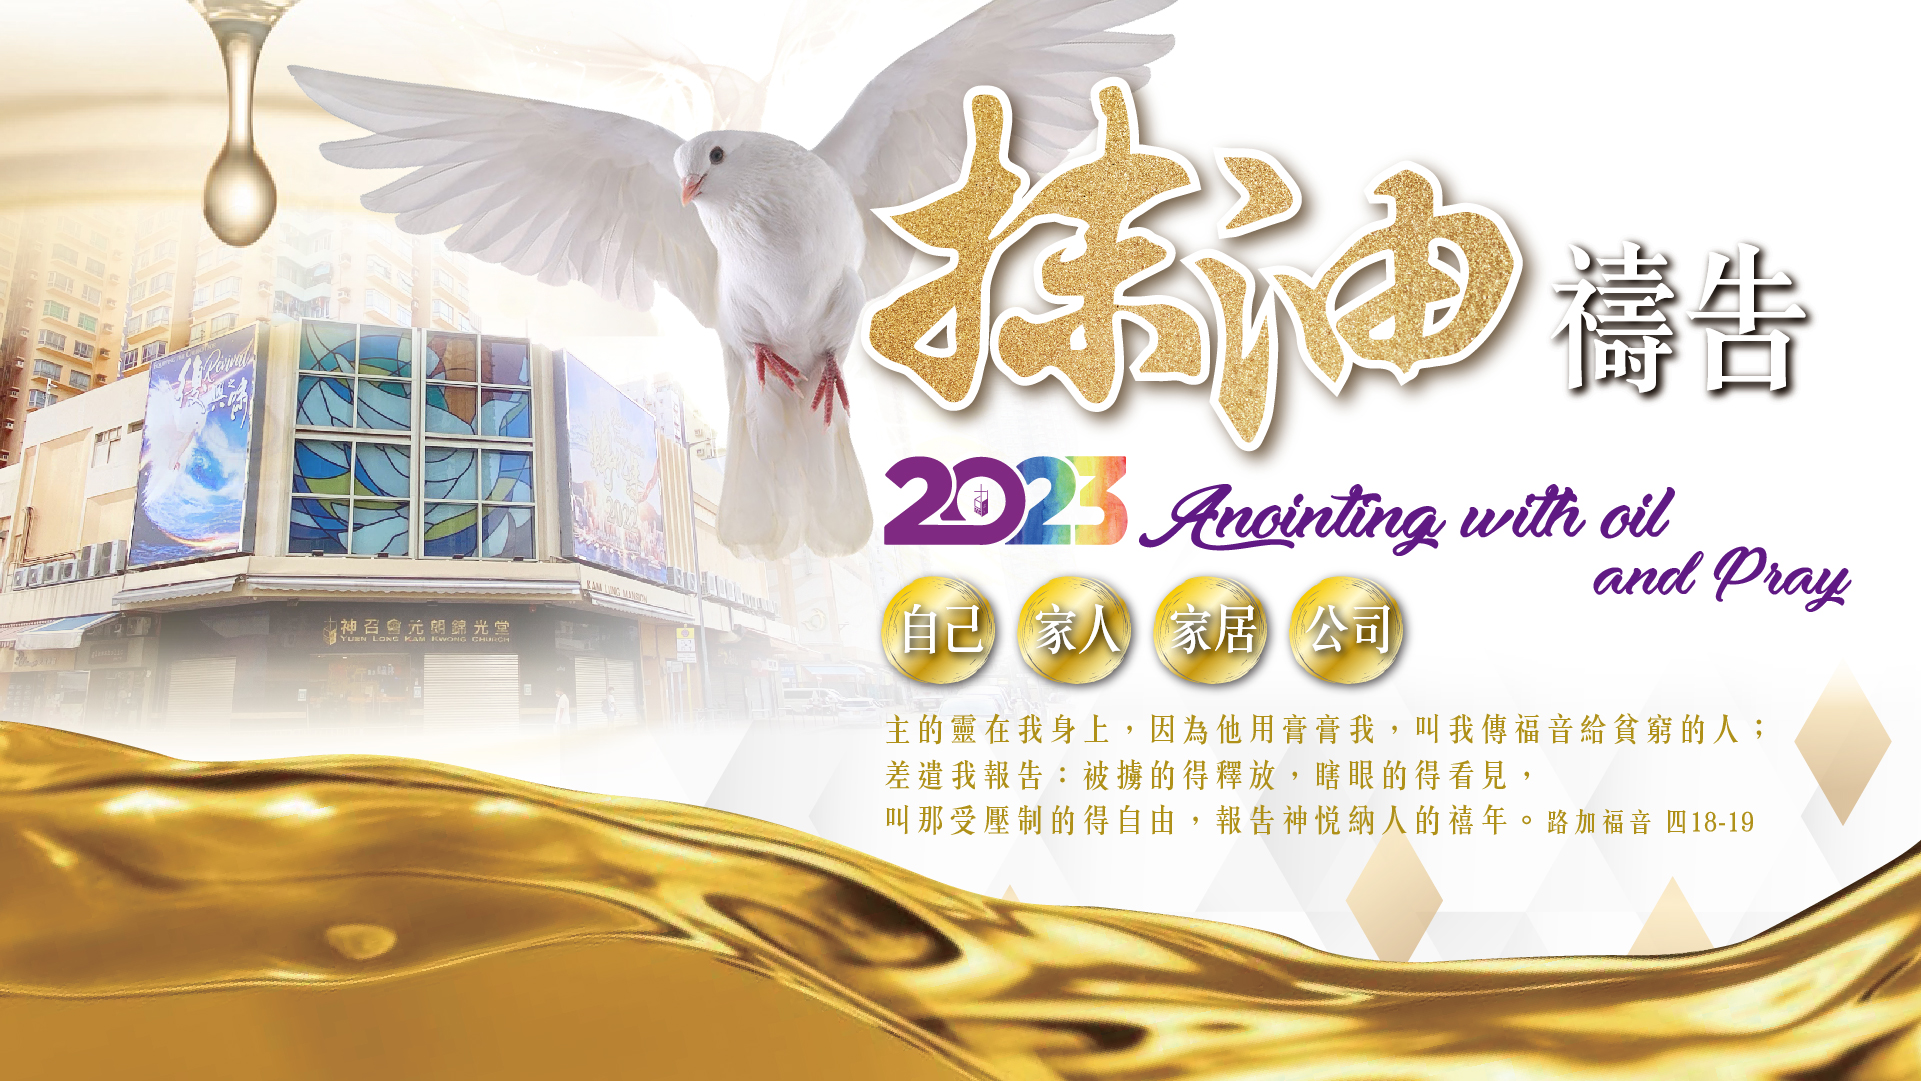 Chinese New Year Service